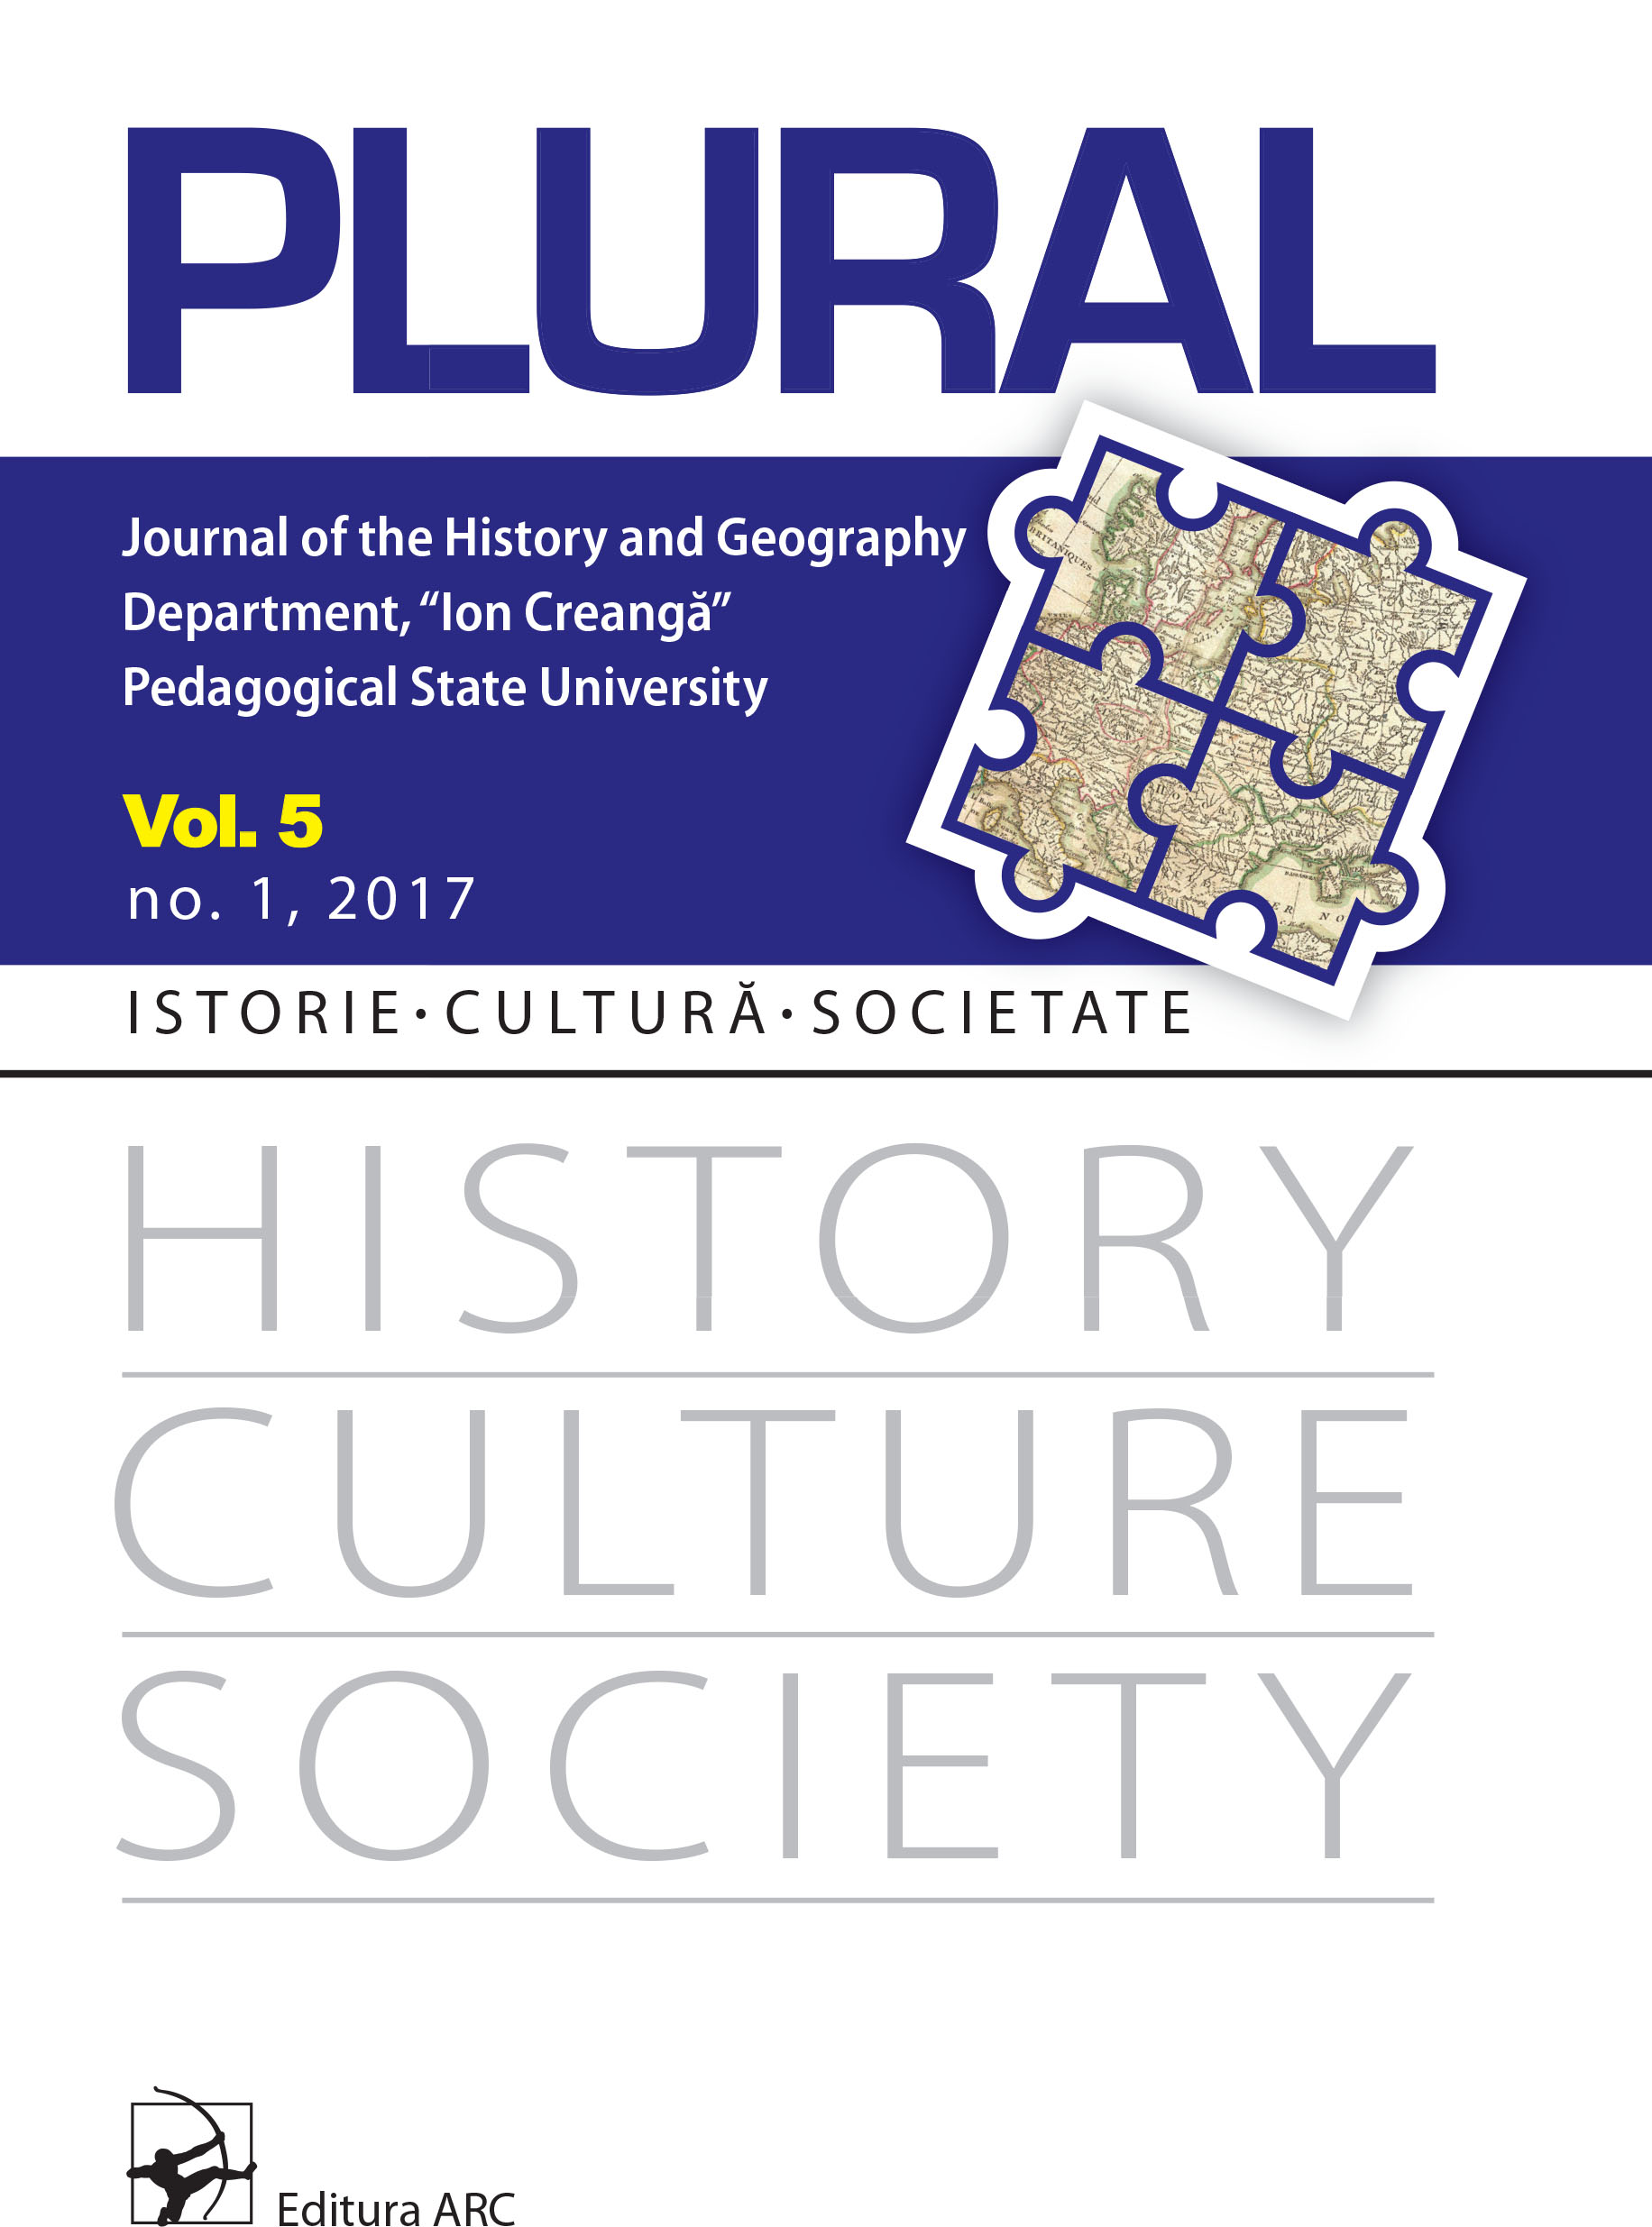 About Transylvania, Bucharest, Bessarabia, medieval Slavs and more ... Interview with Professor Florin Curta, University of Florida, USA Cover Image